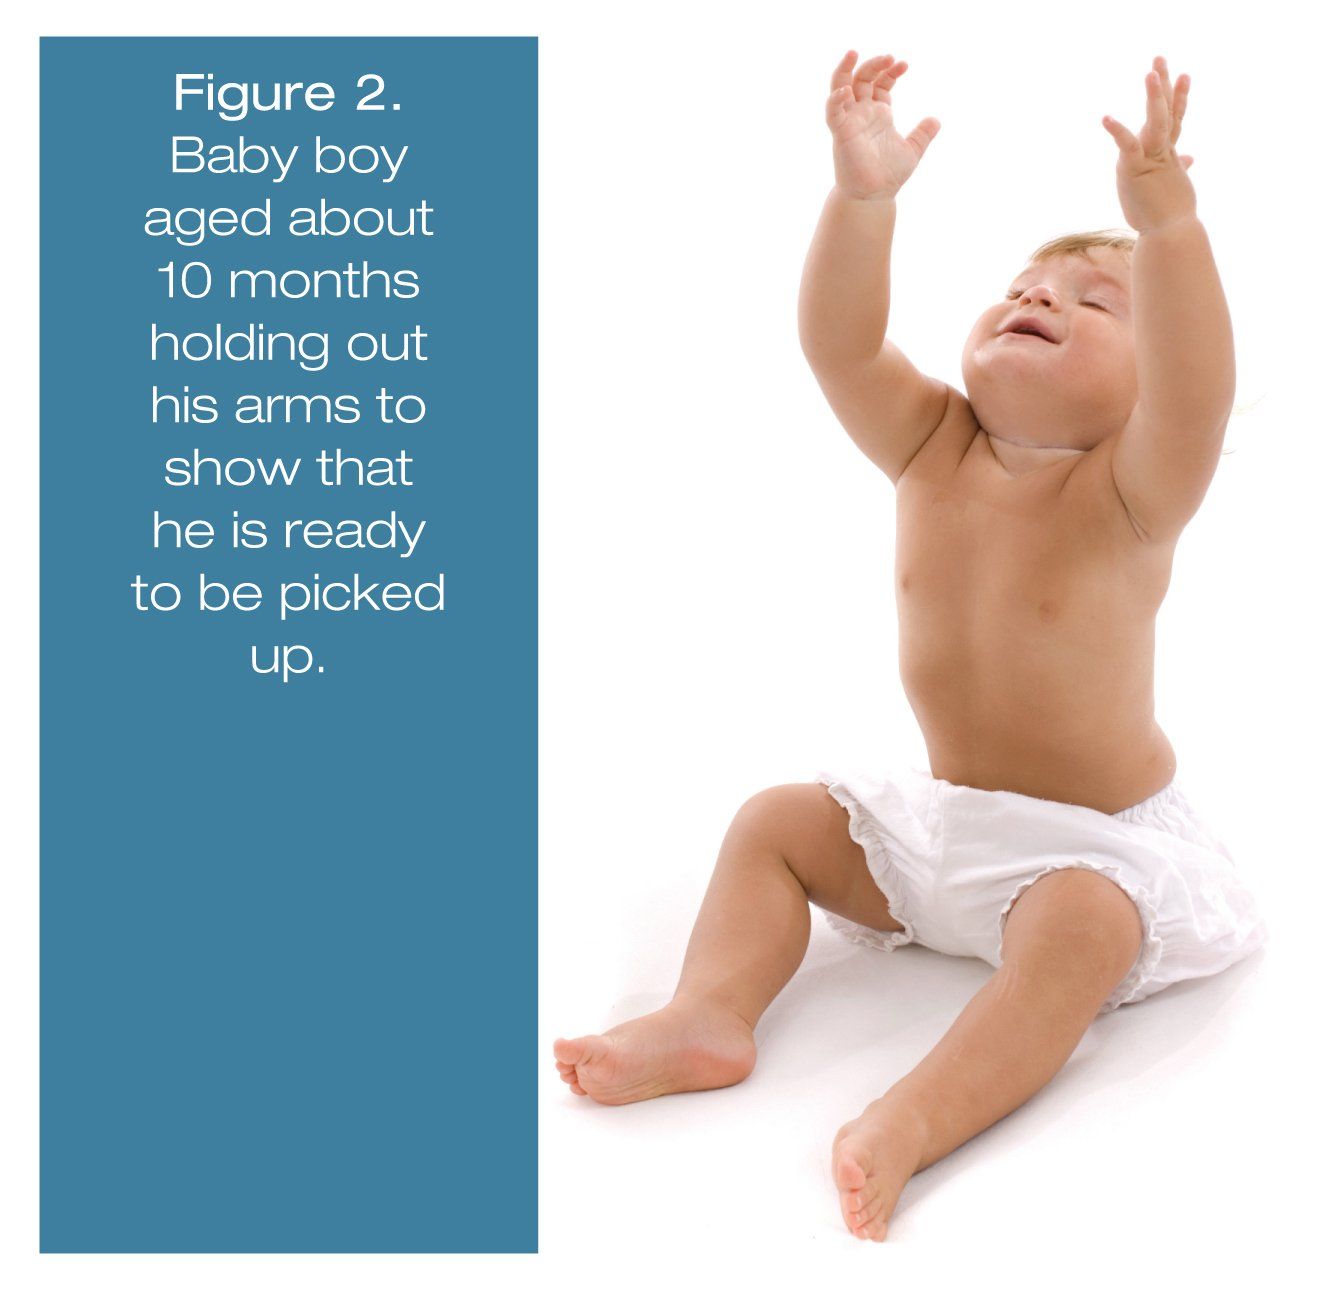 Baby boy aged about 10 months holding out his arms to show that he is ready to be picked up.